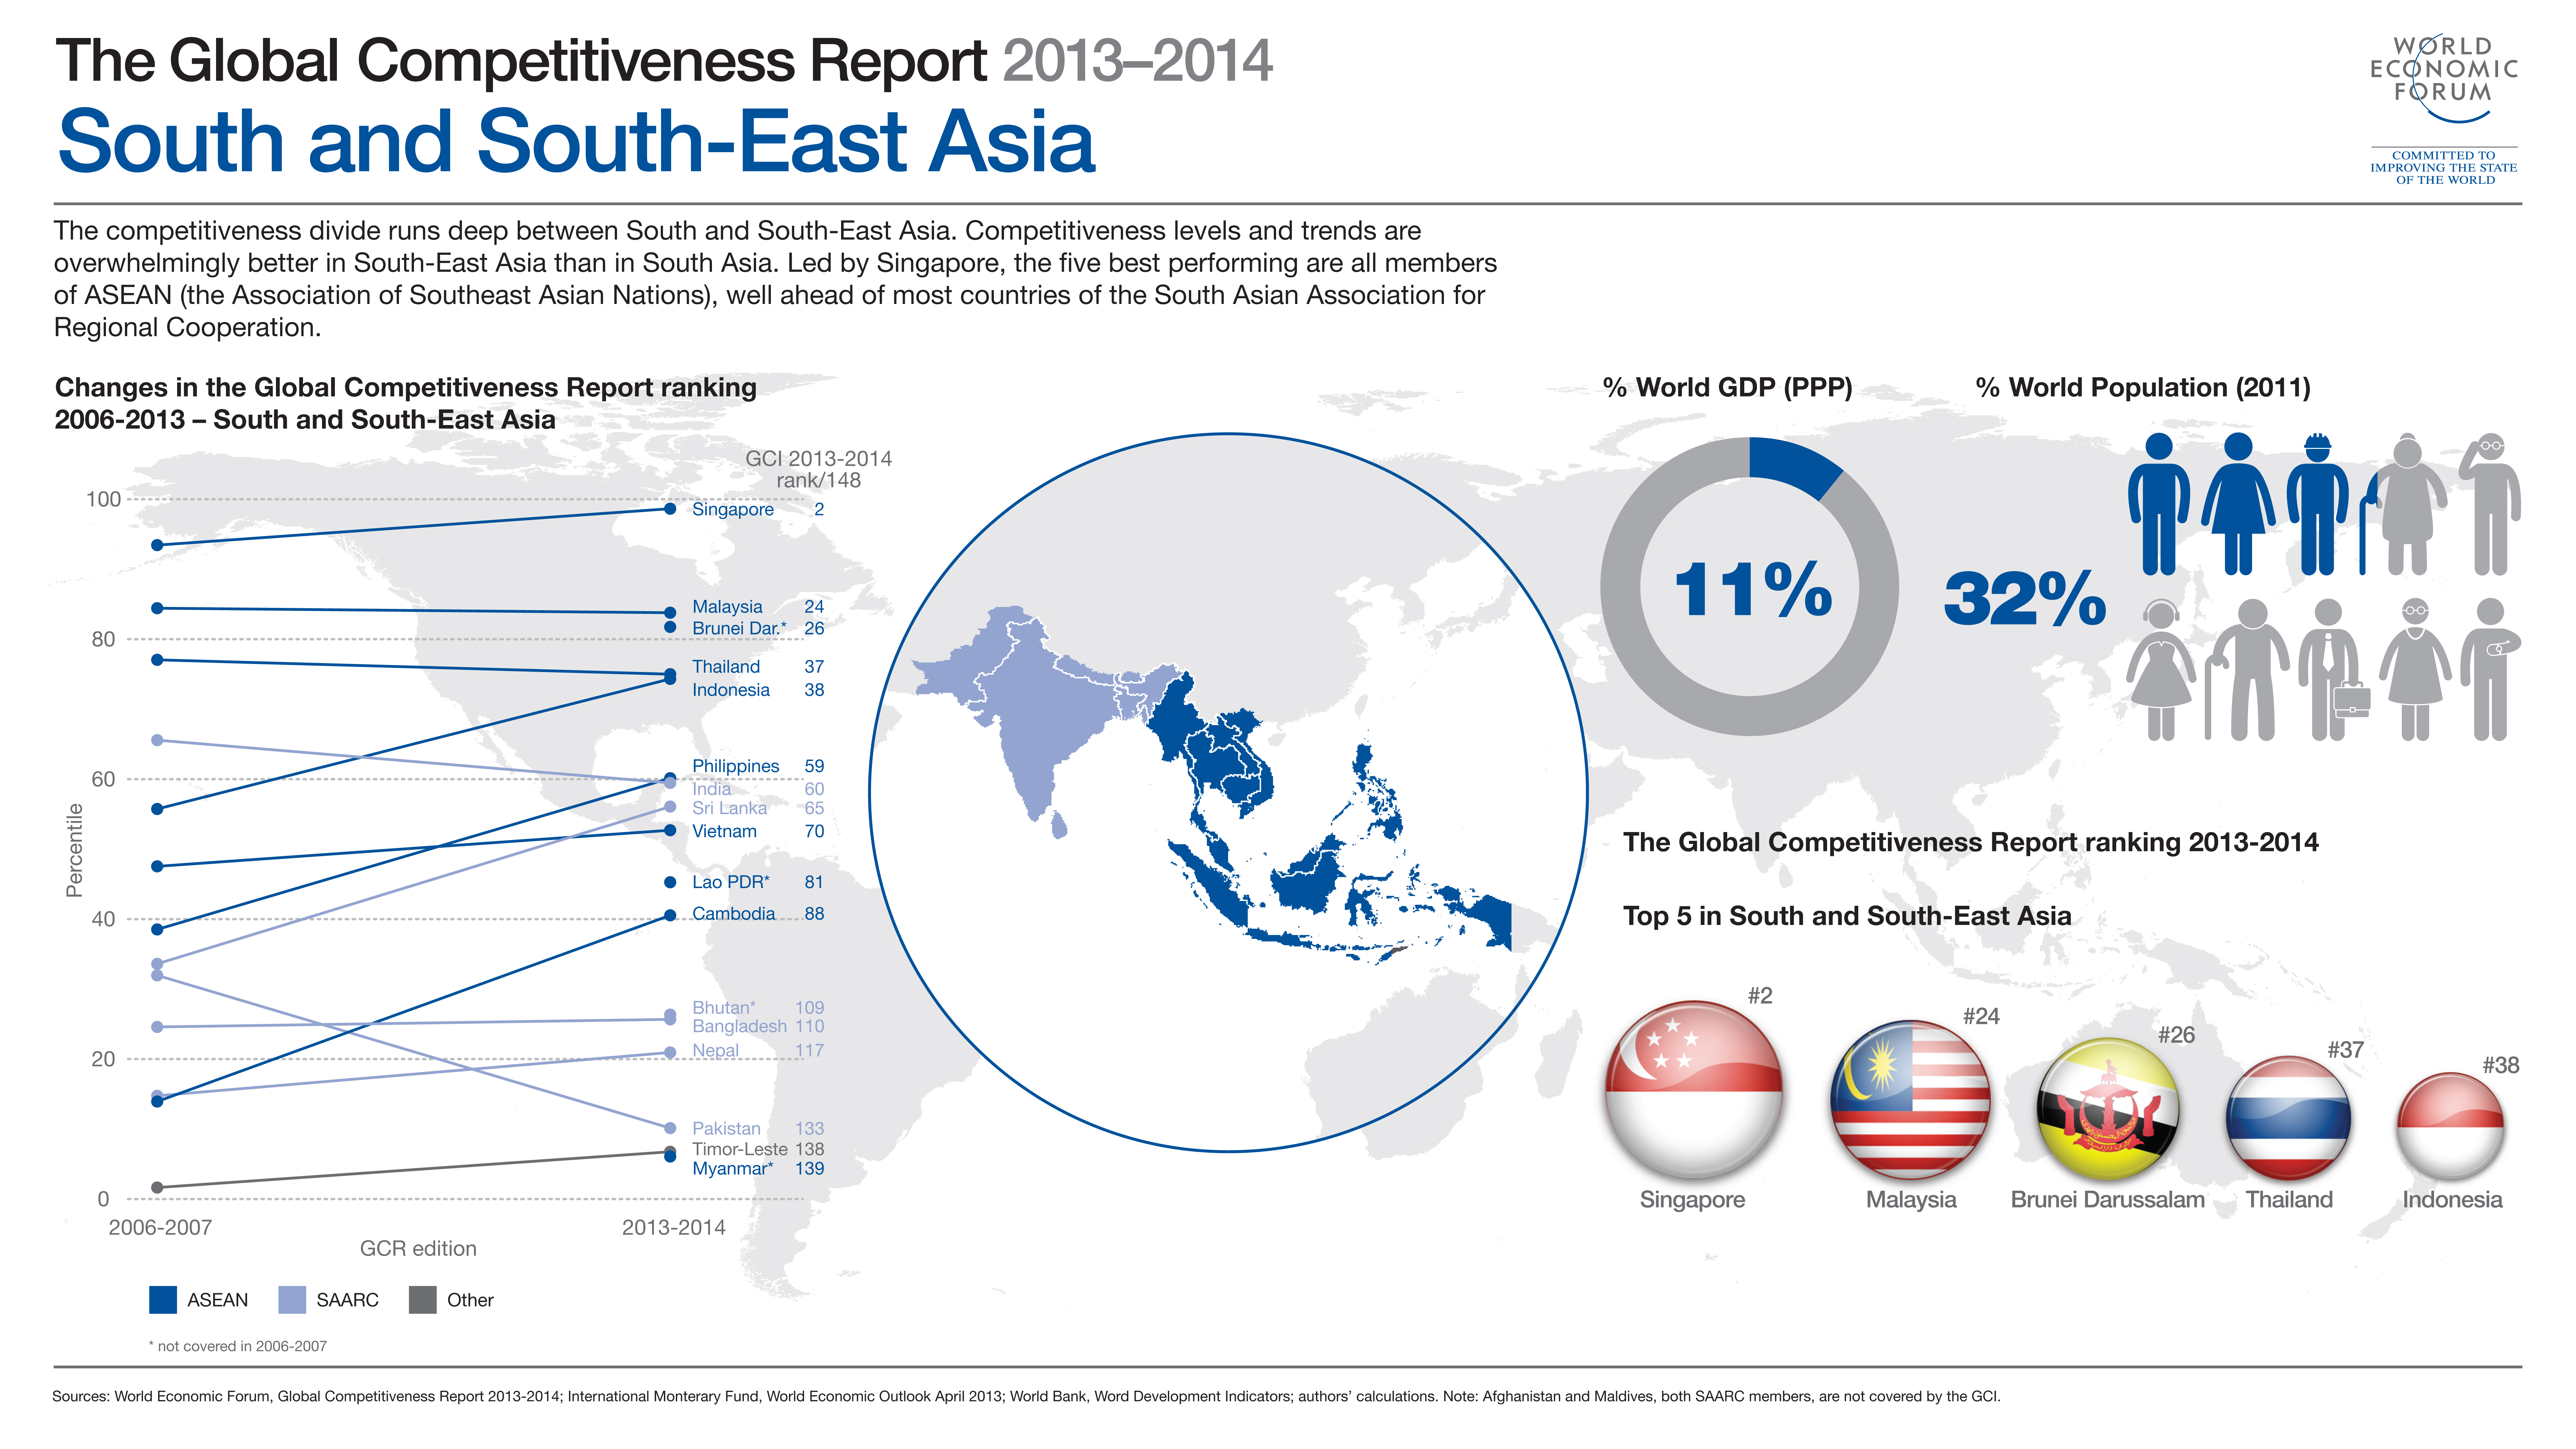 The Global Competitiveness Report 2013-2014 South East Asia